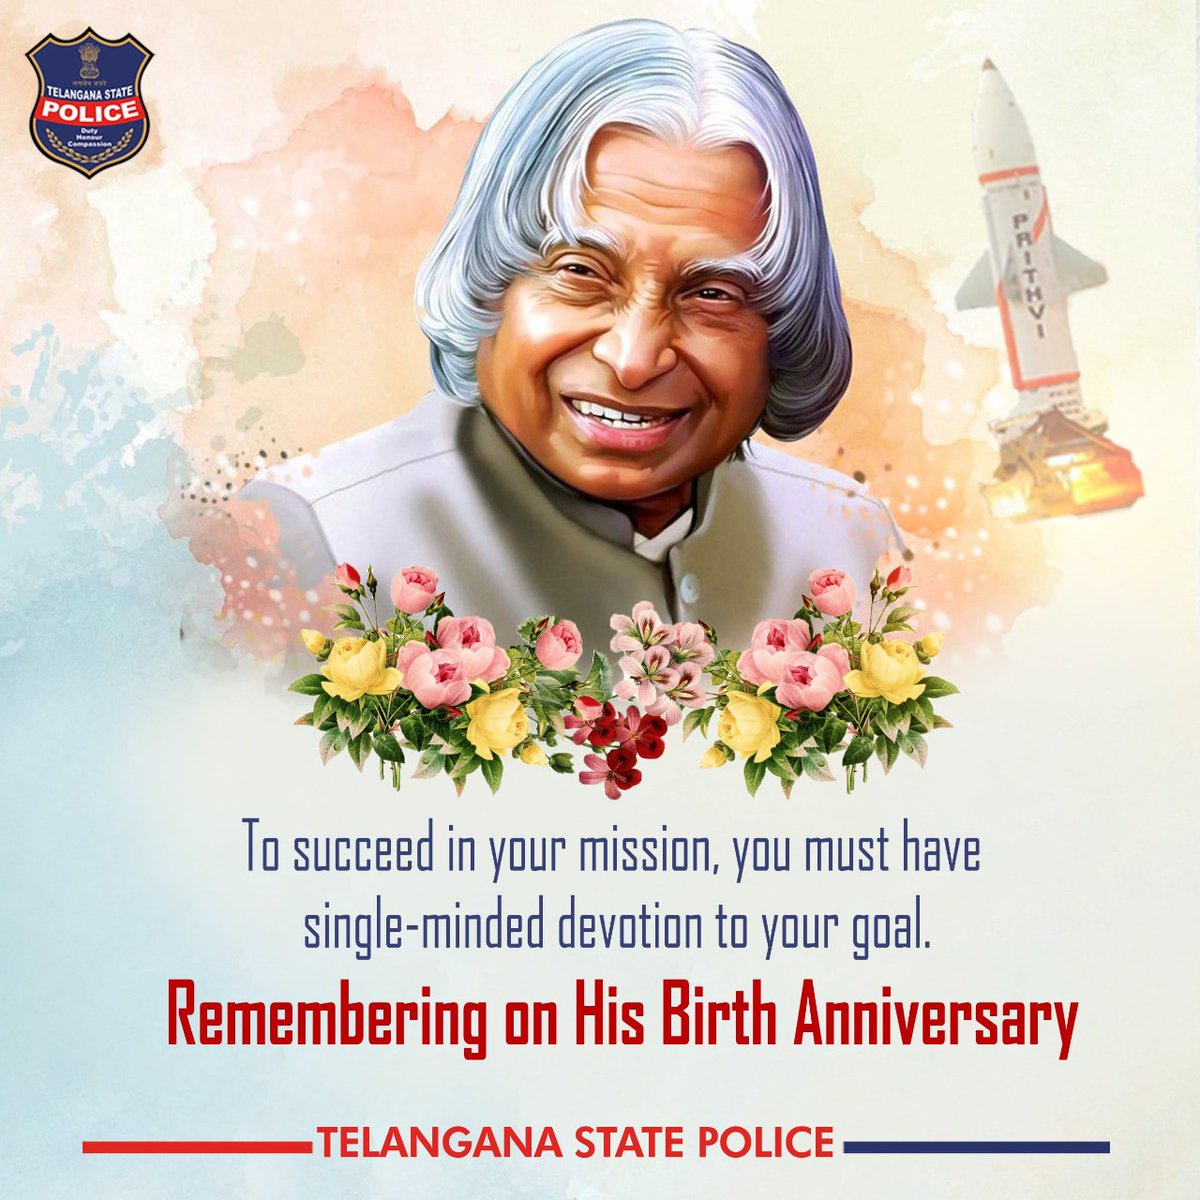 Remembering #MissileMan former President of India & #BharatRatna Dr. APJ Abdul Kalam on his 88th birth anniversary. #StudentsDay2022 #MissileManofIndia